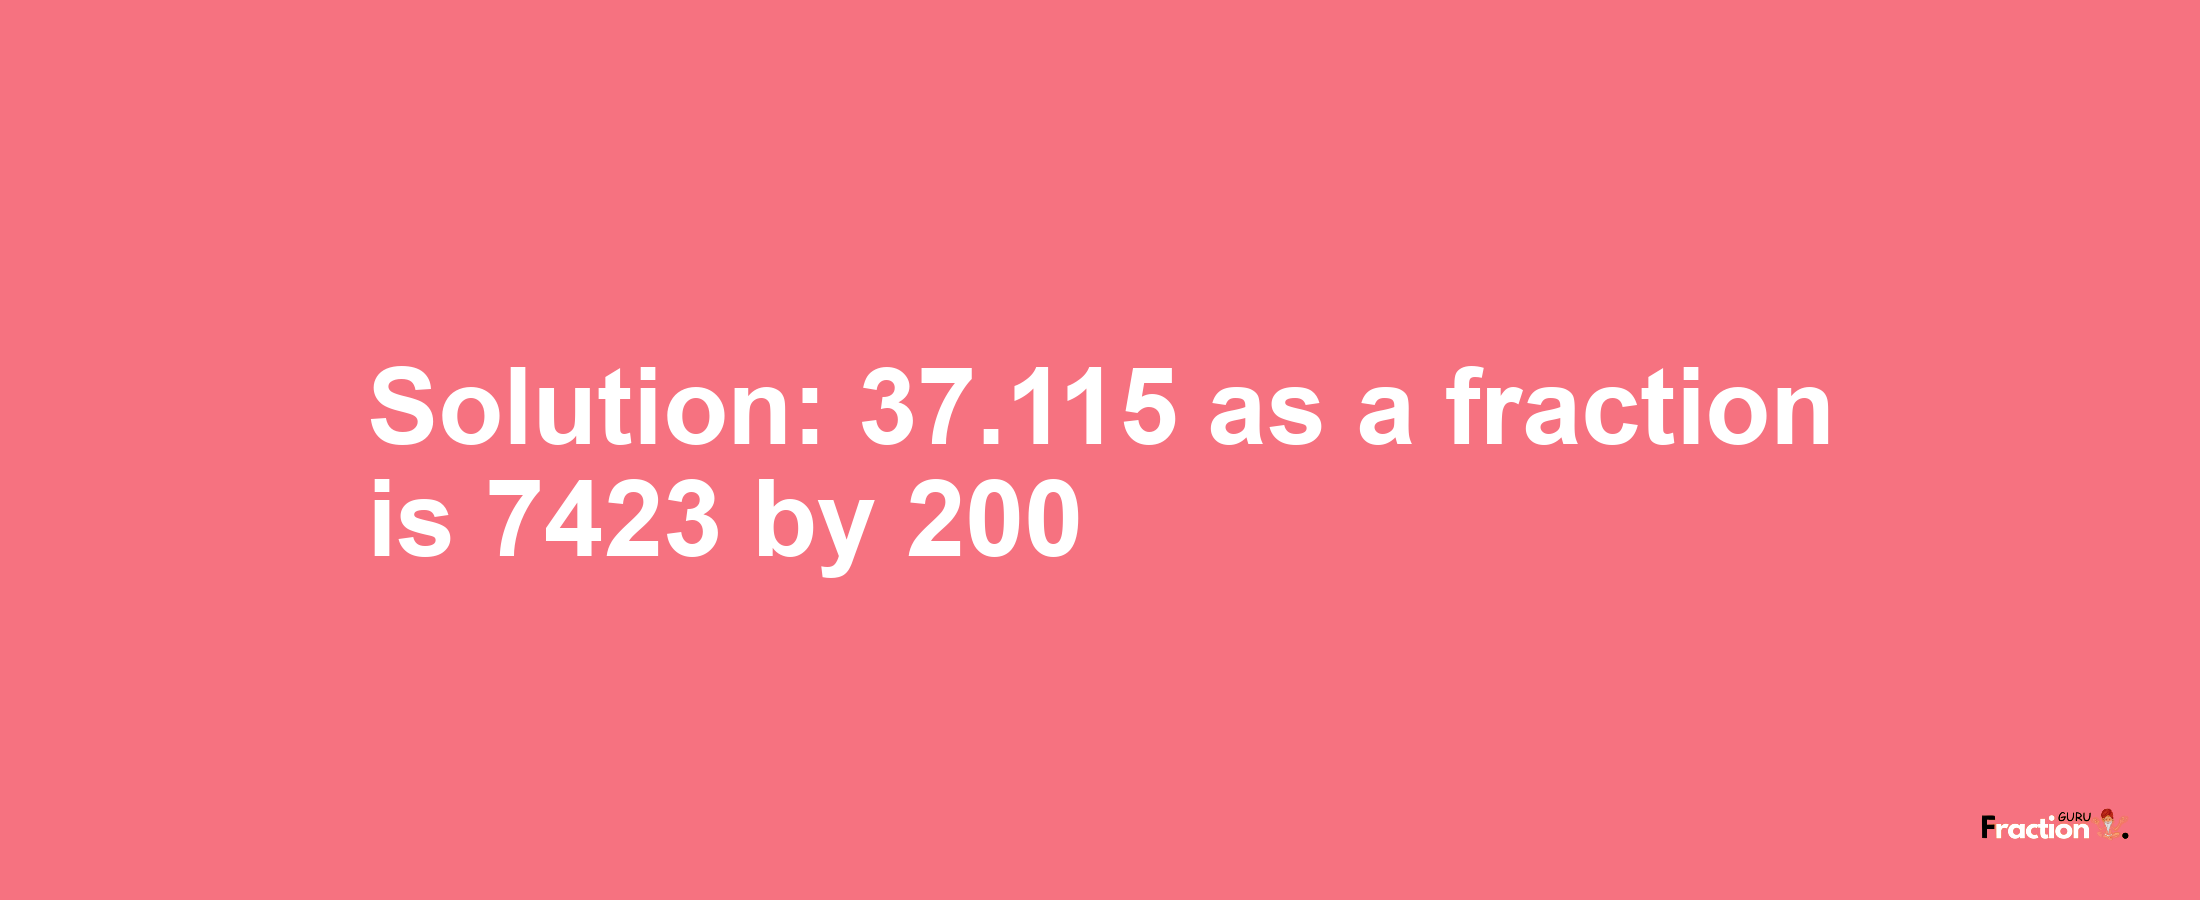 Solution:37.115 as a fraction is 7423/200